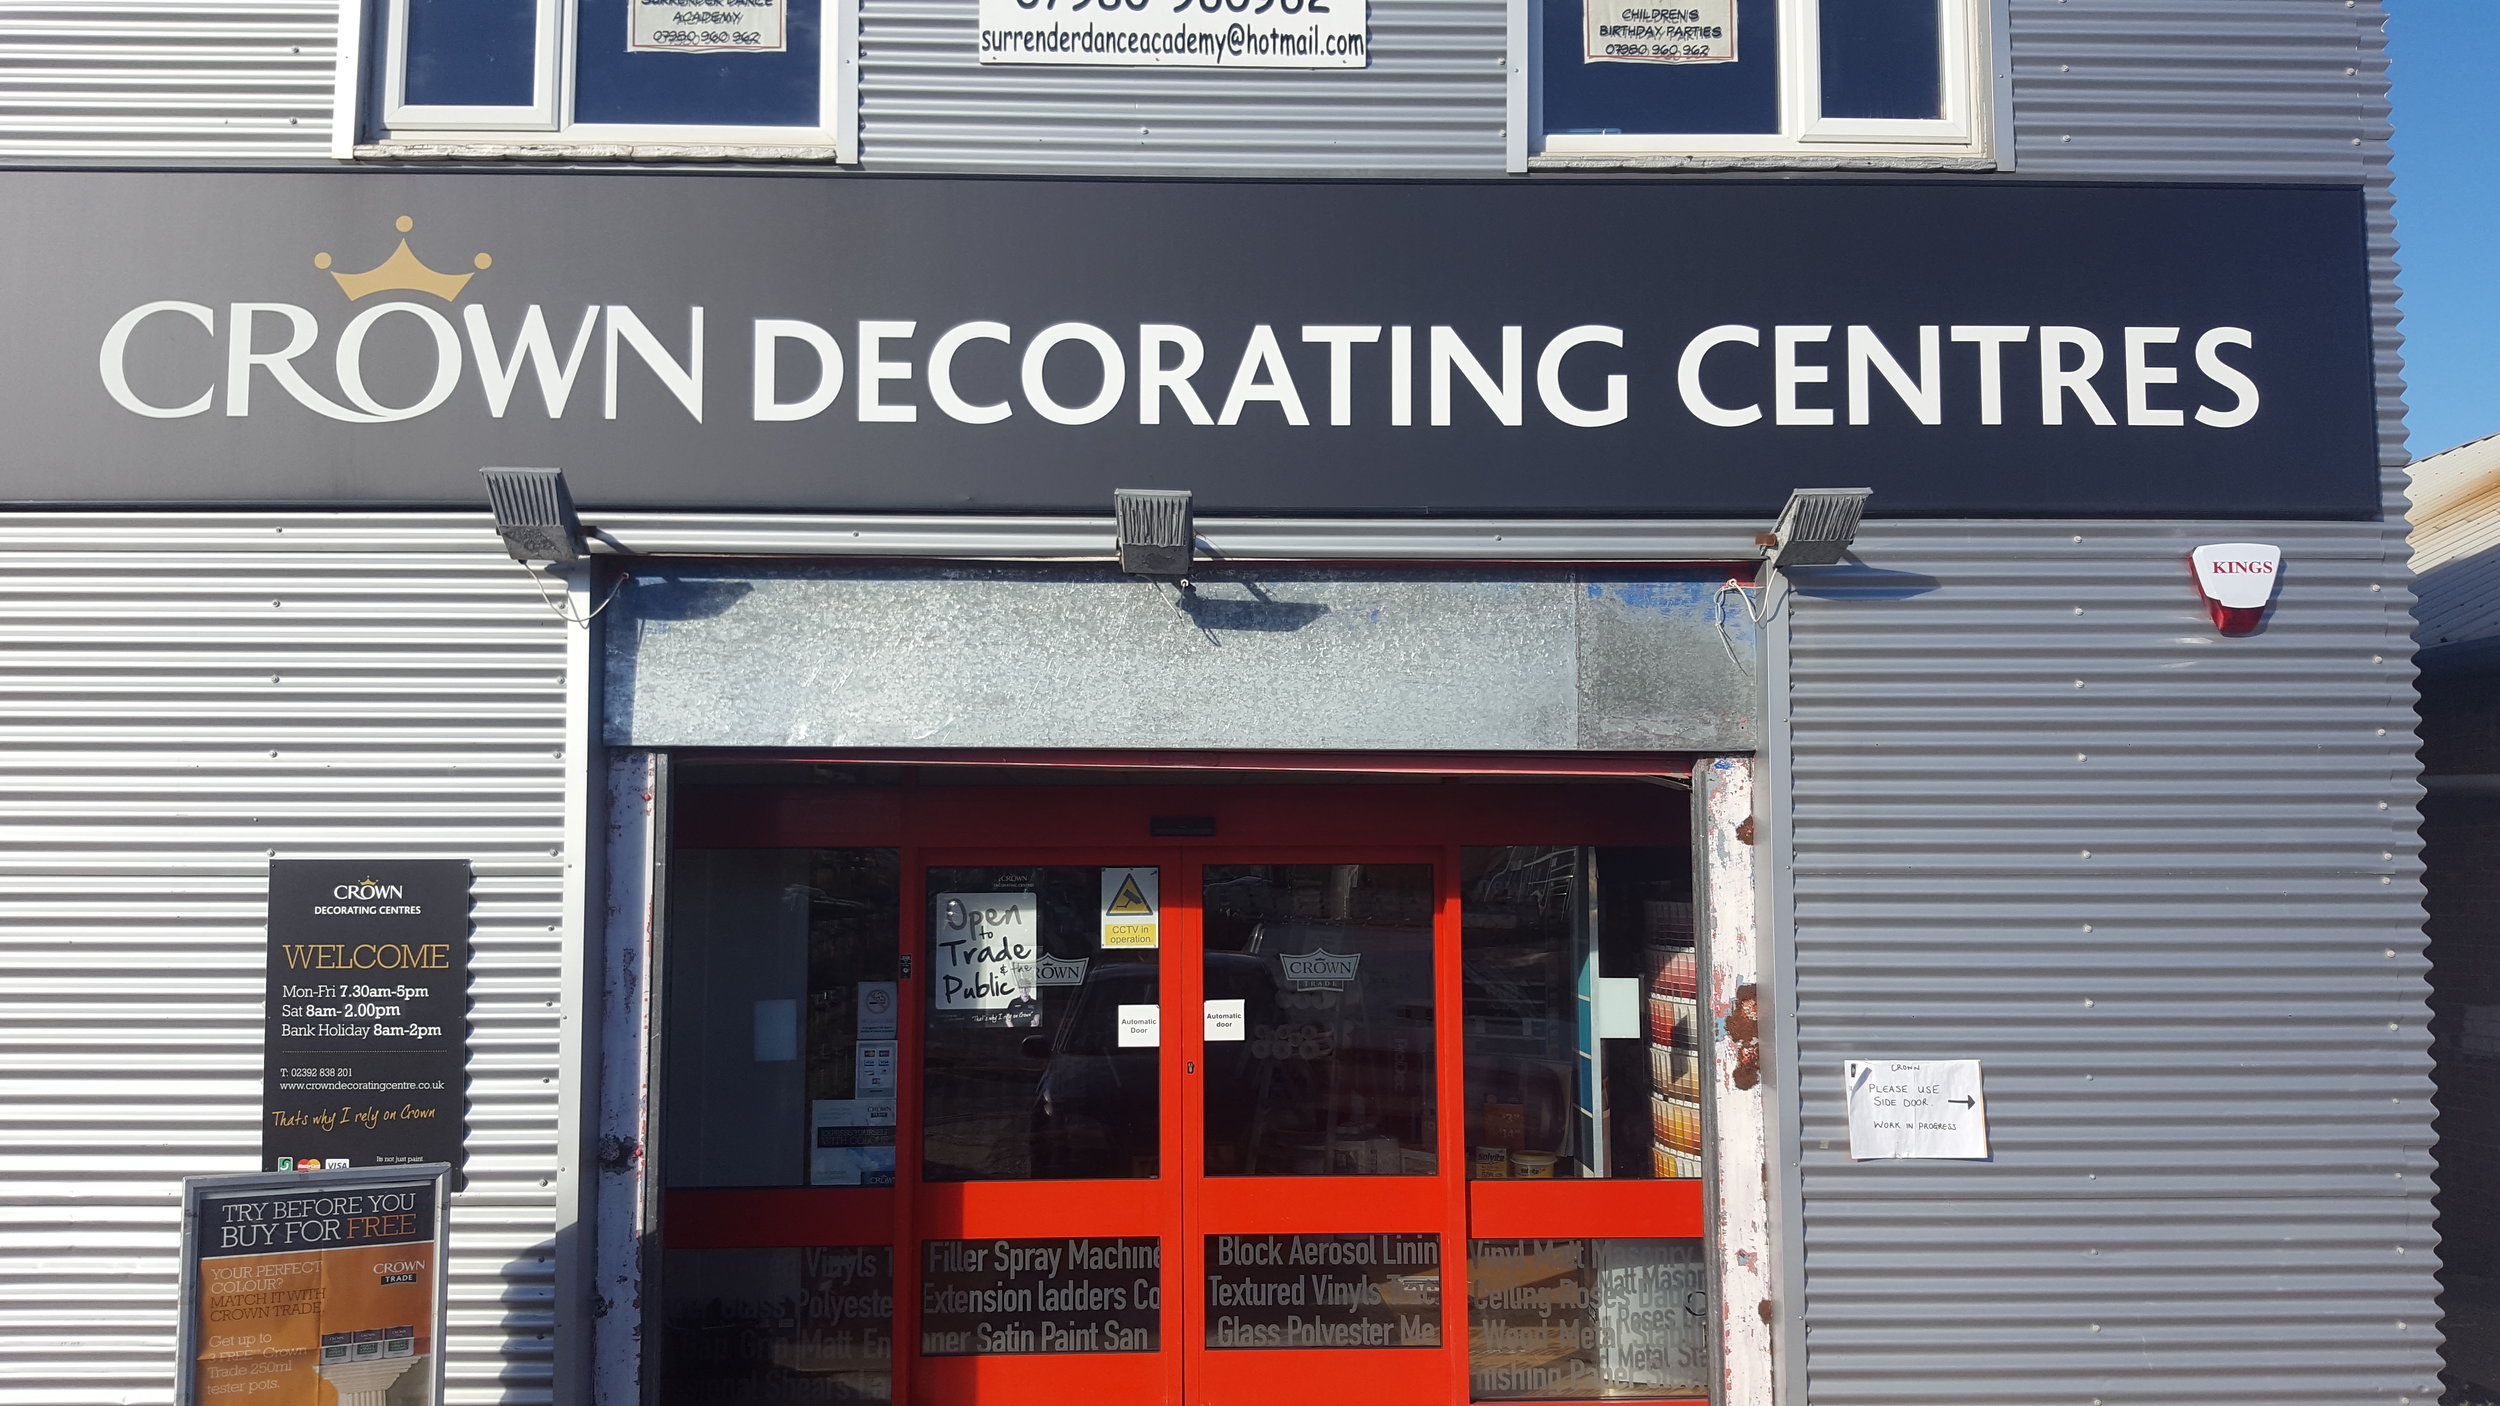 Crown Decorating Centres - Foleshill - & similar nearby | nearer.com